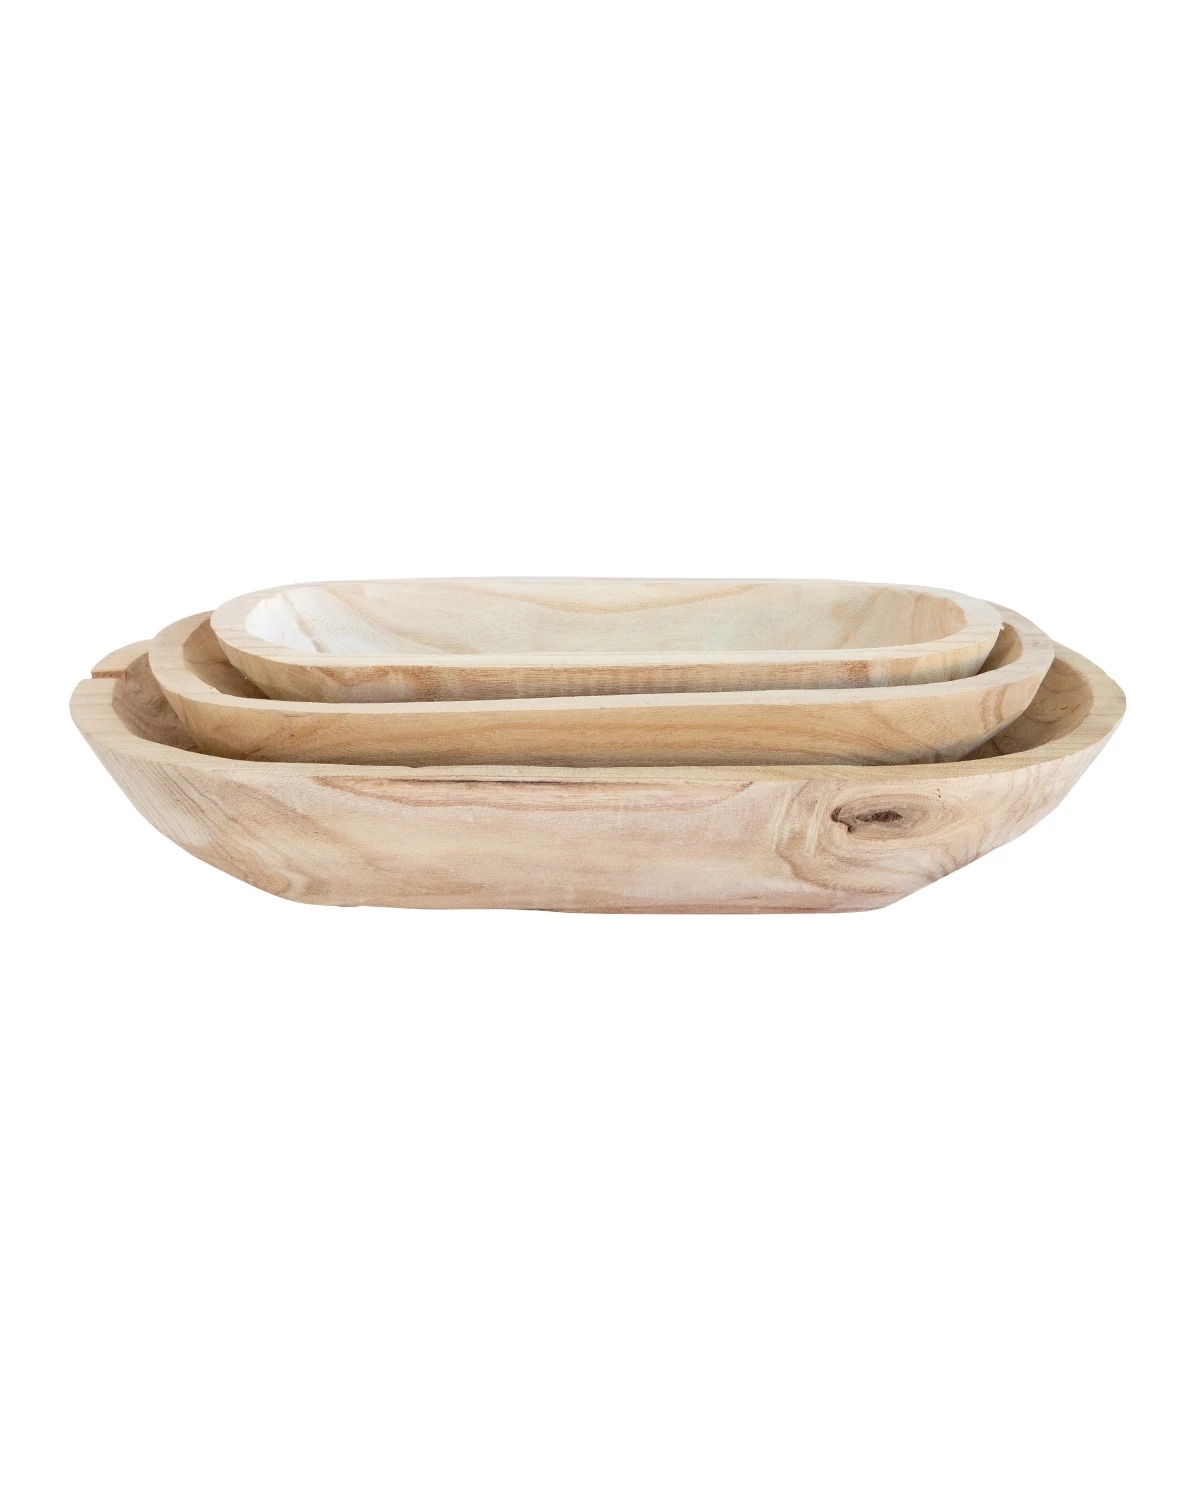 OBLONG BOWL - SMALL - Image 2